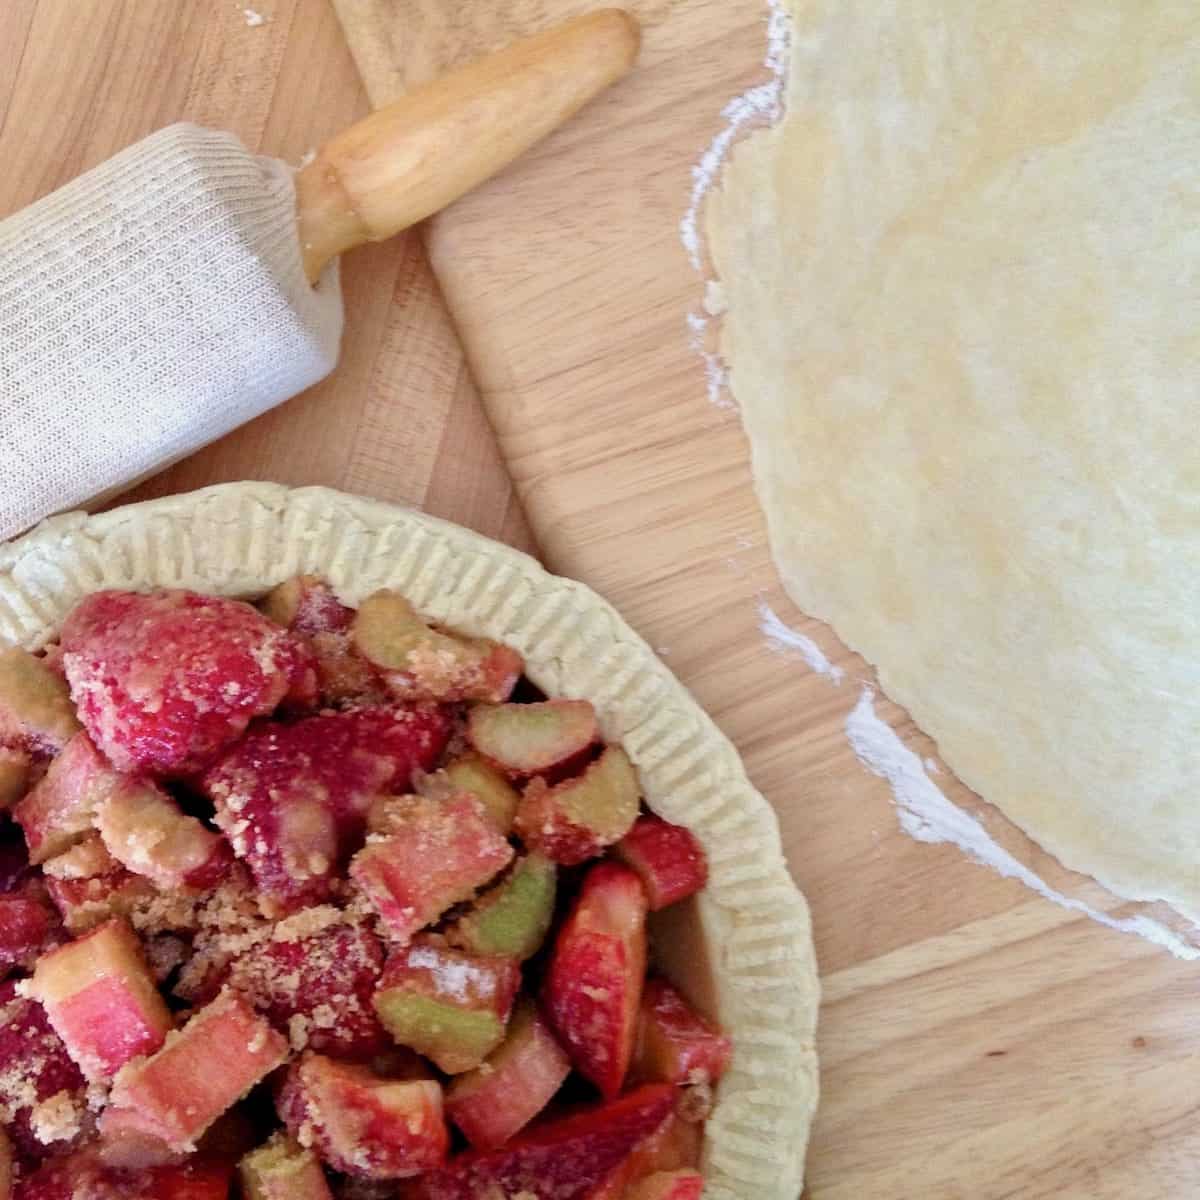 Rolling crust and filling pie.